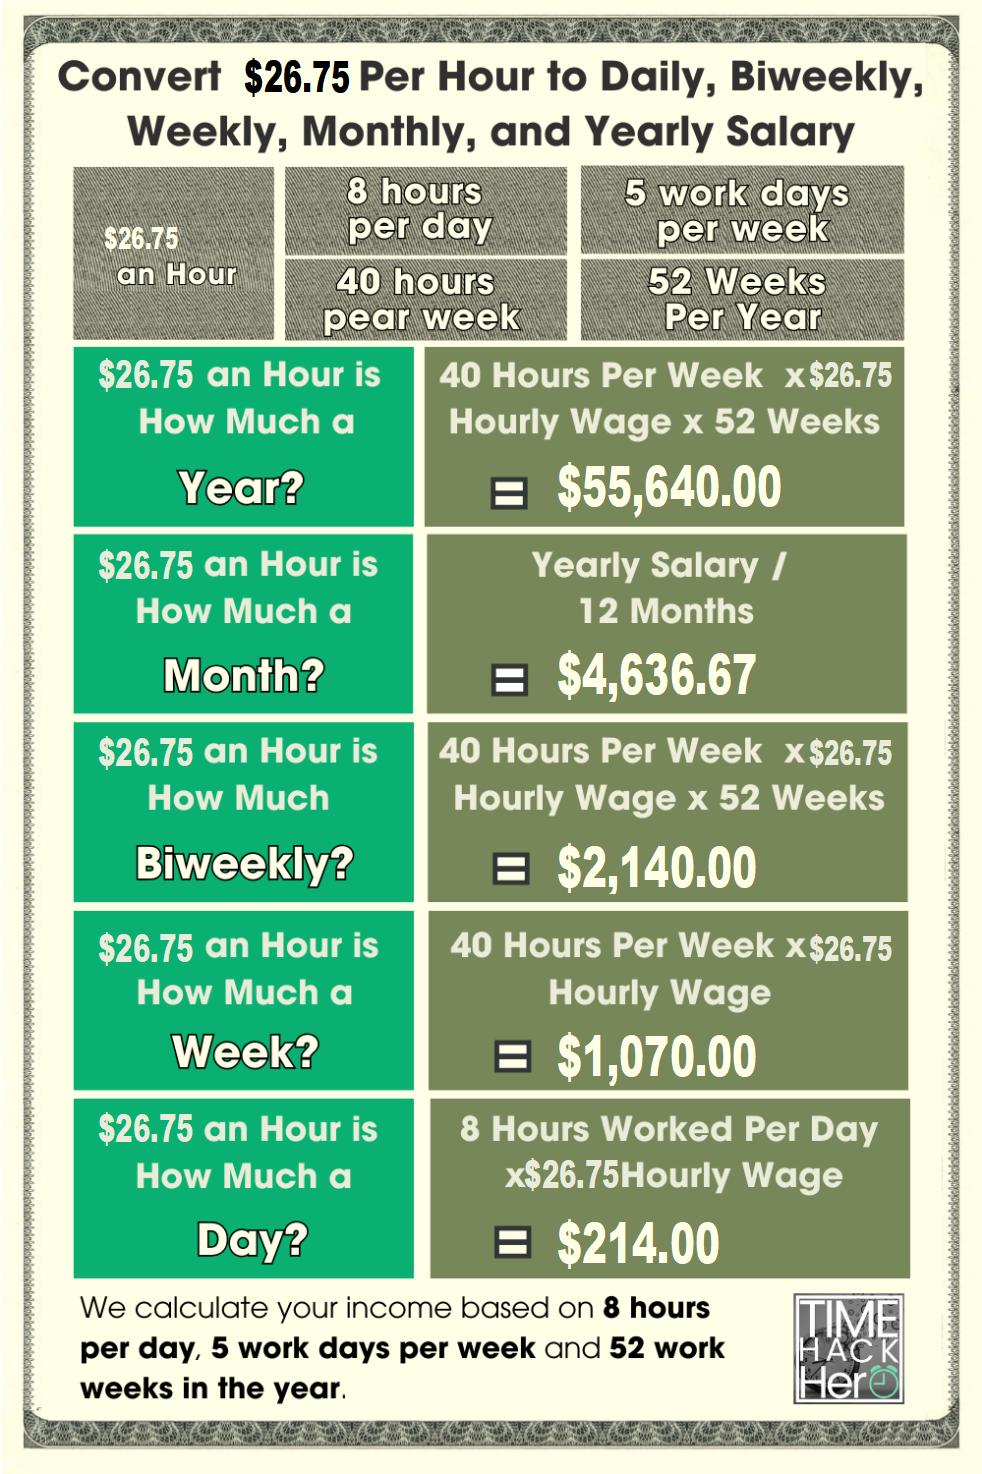 Convert $26.75 Per Hour to Weekly, Monthly, and Yearly Salary